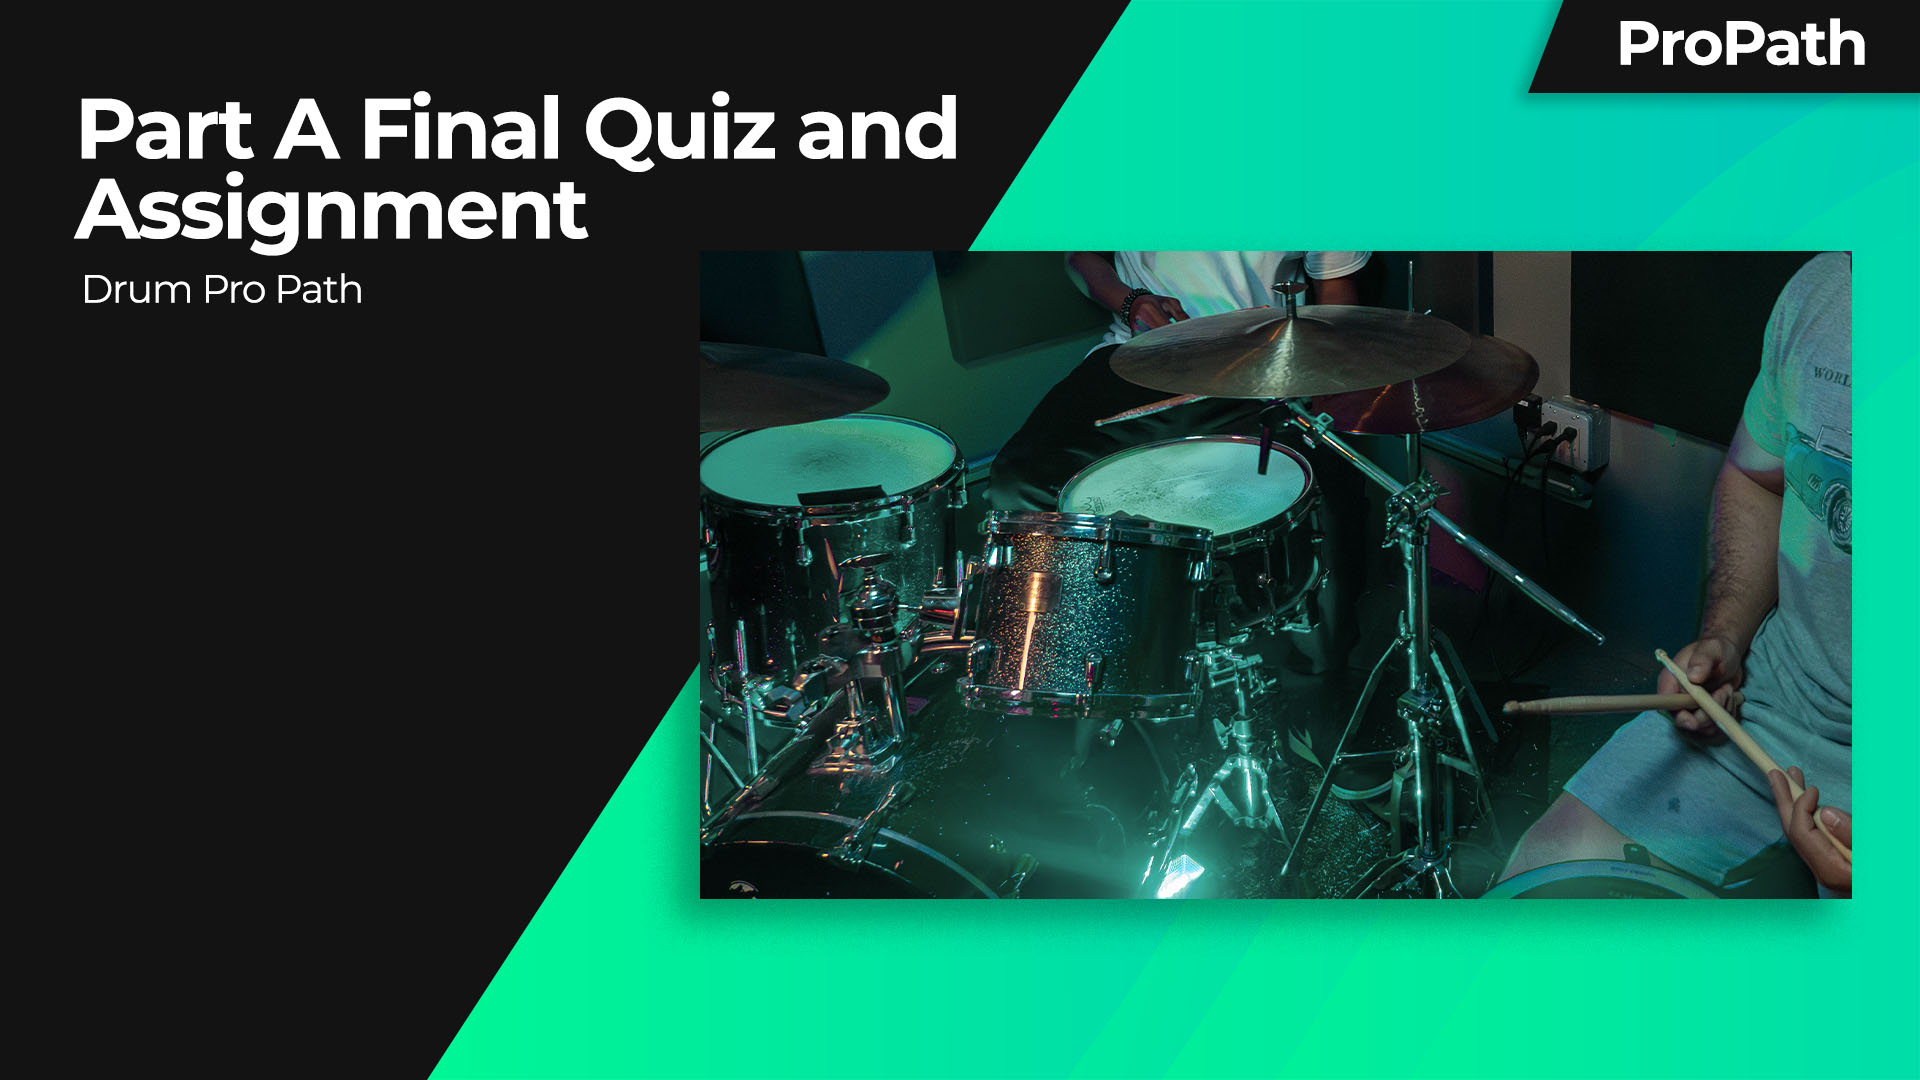 Drum Pro Path: Part A Final Quiz and Assignment